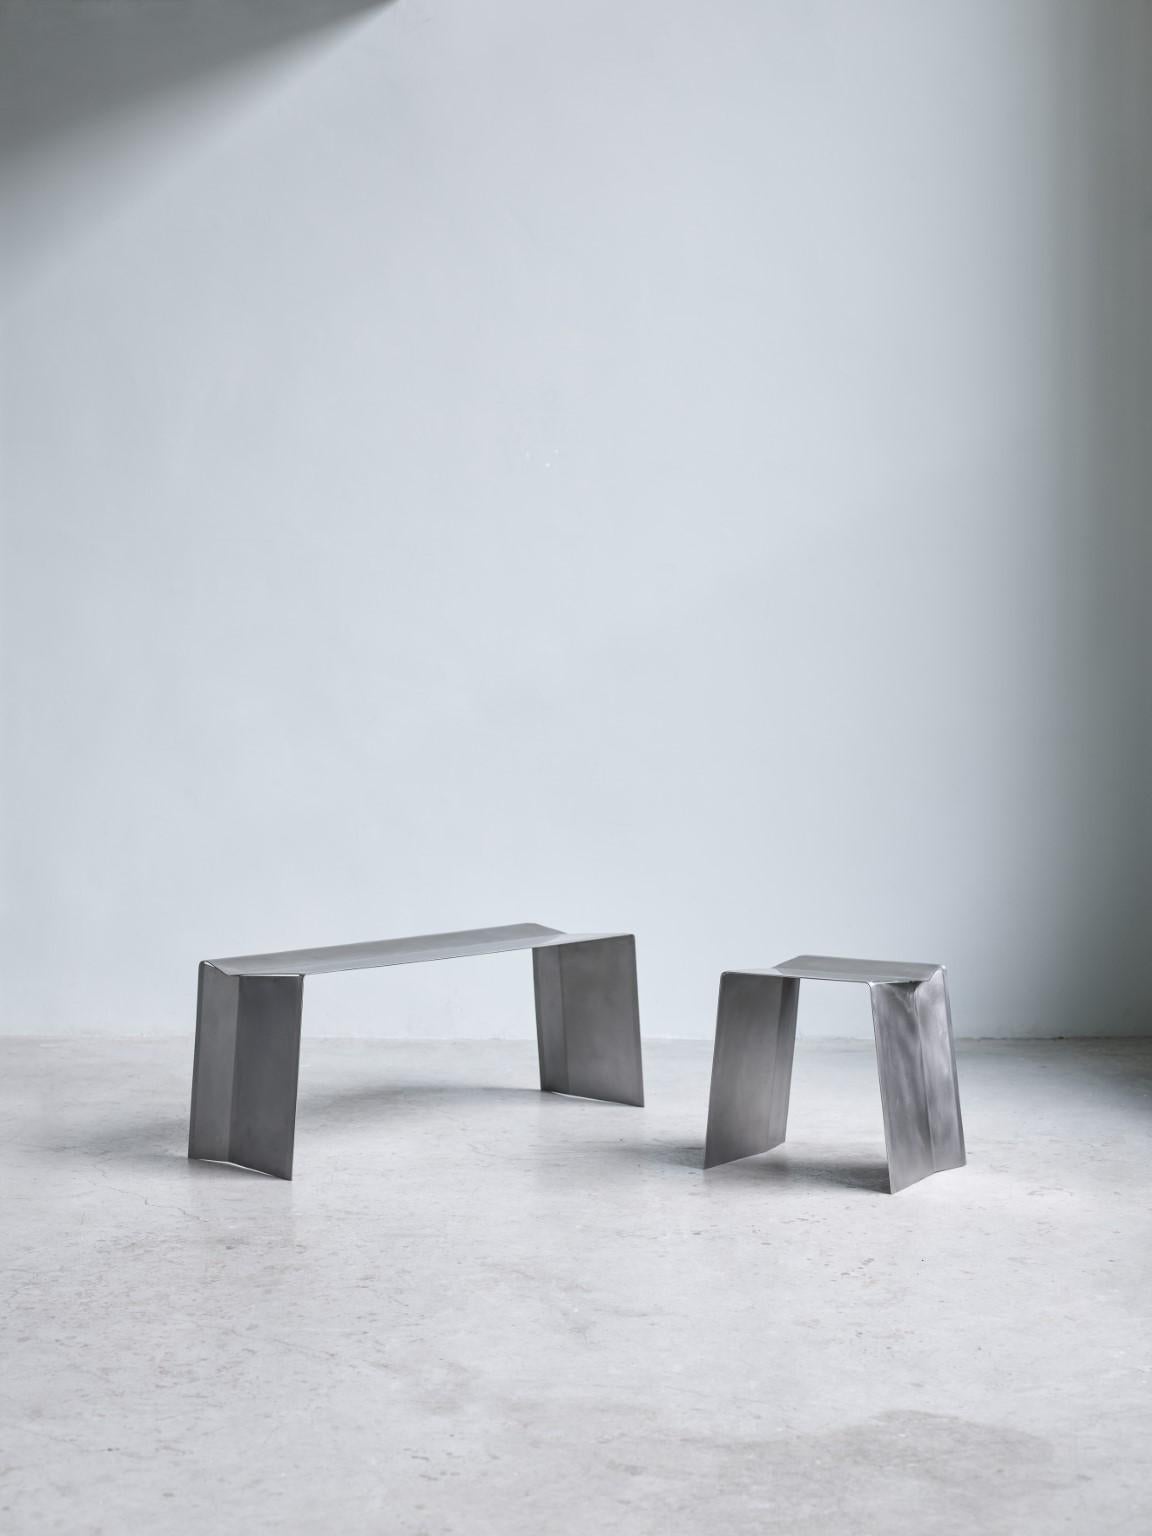 Set of Camber stool and bench by Paul Coenen
Dimensions: 
Stool: W 47 x D 37 x H 45 cm
Bench: W 118 x D 37 x H 45 cm
Materials: Stainless steel

The Camber bench and stool originated from the idea of manufacturing a piece of furniture from a